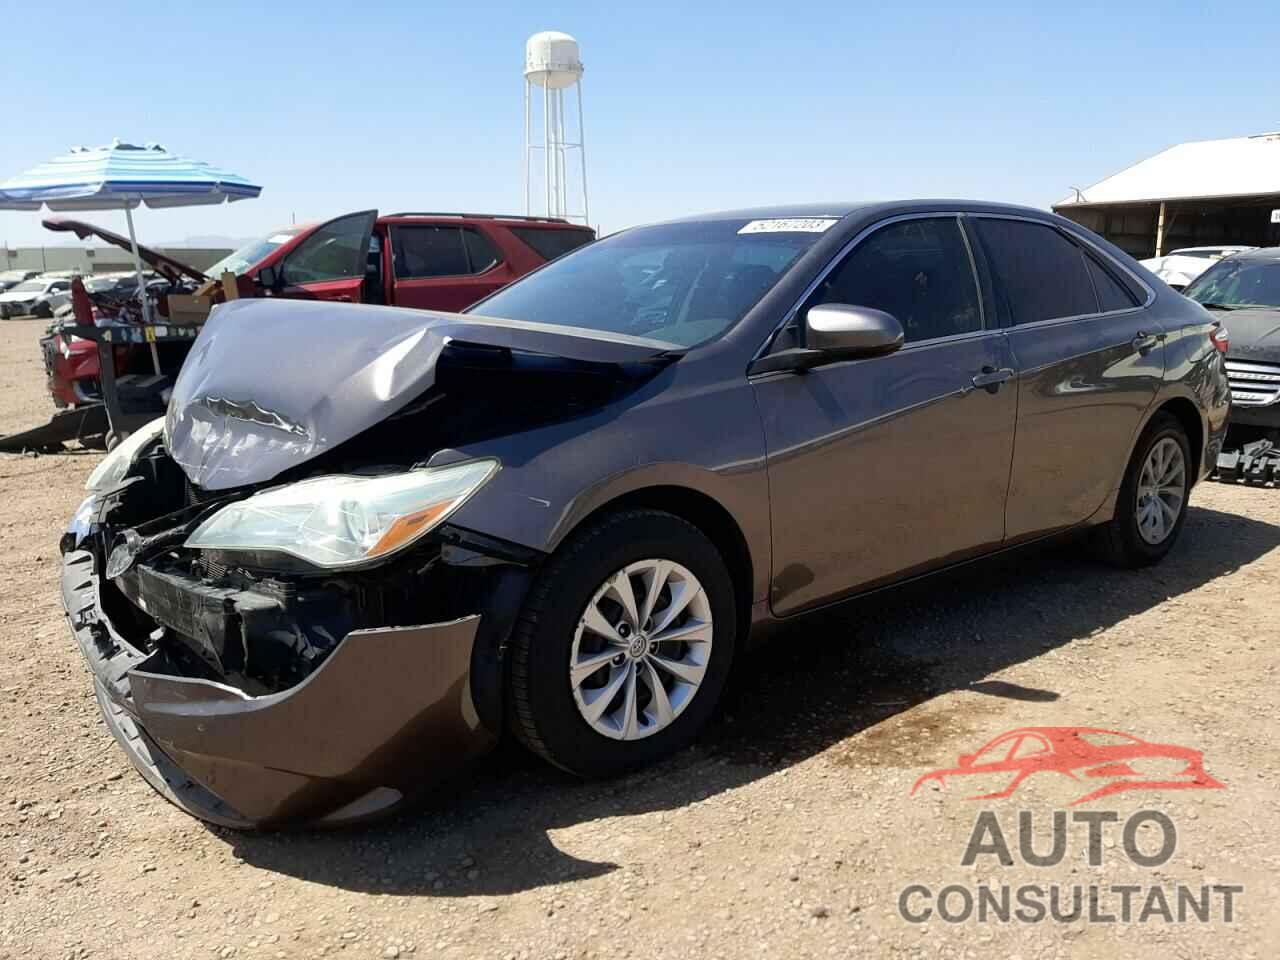 TOYOTA CAMRY 2016 - 4T4BF1FK5GR536579